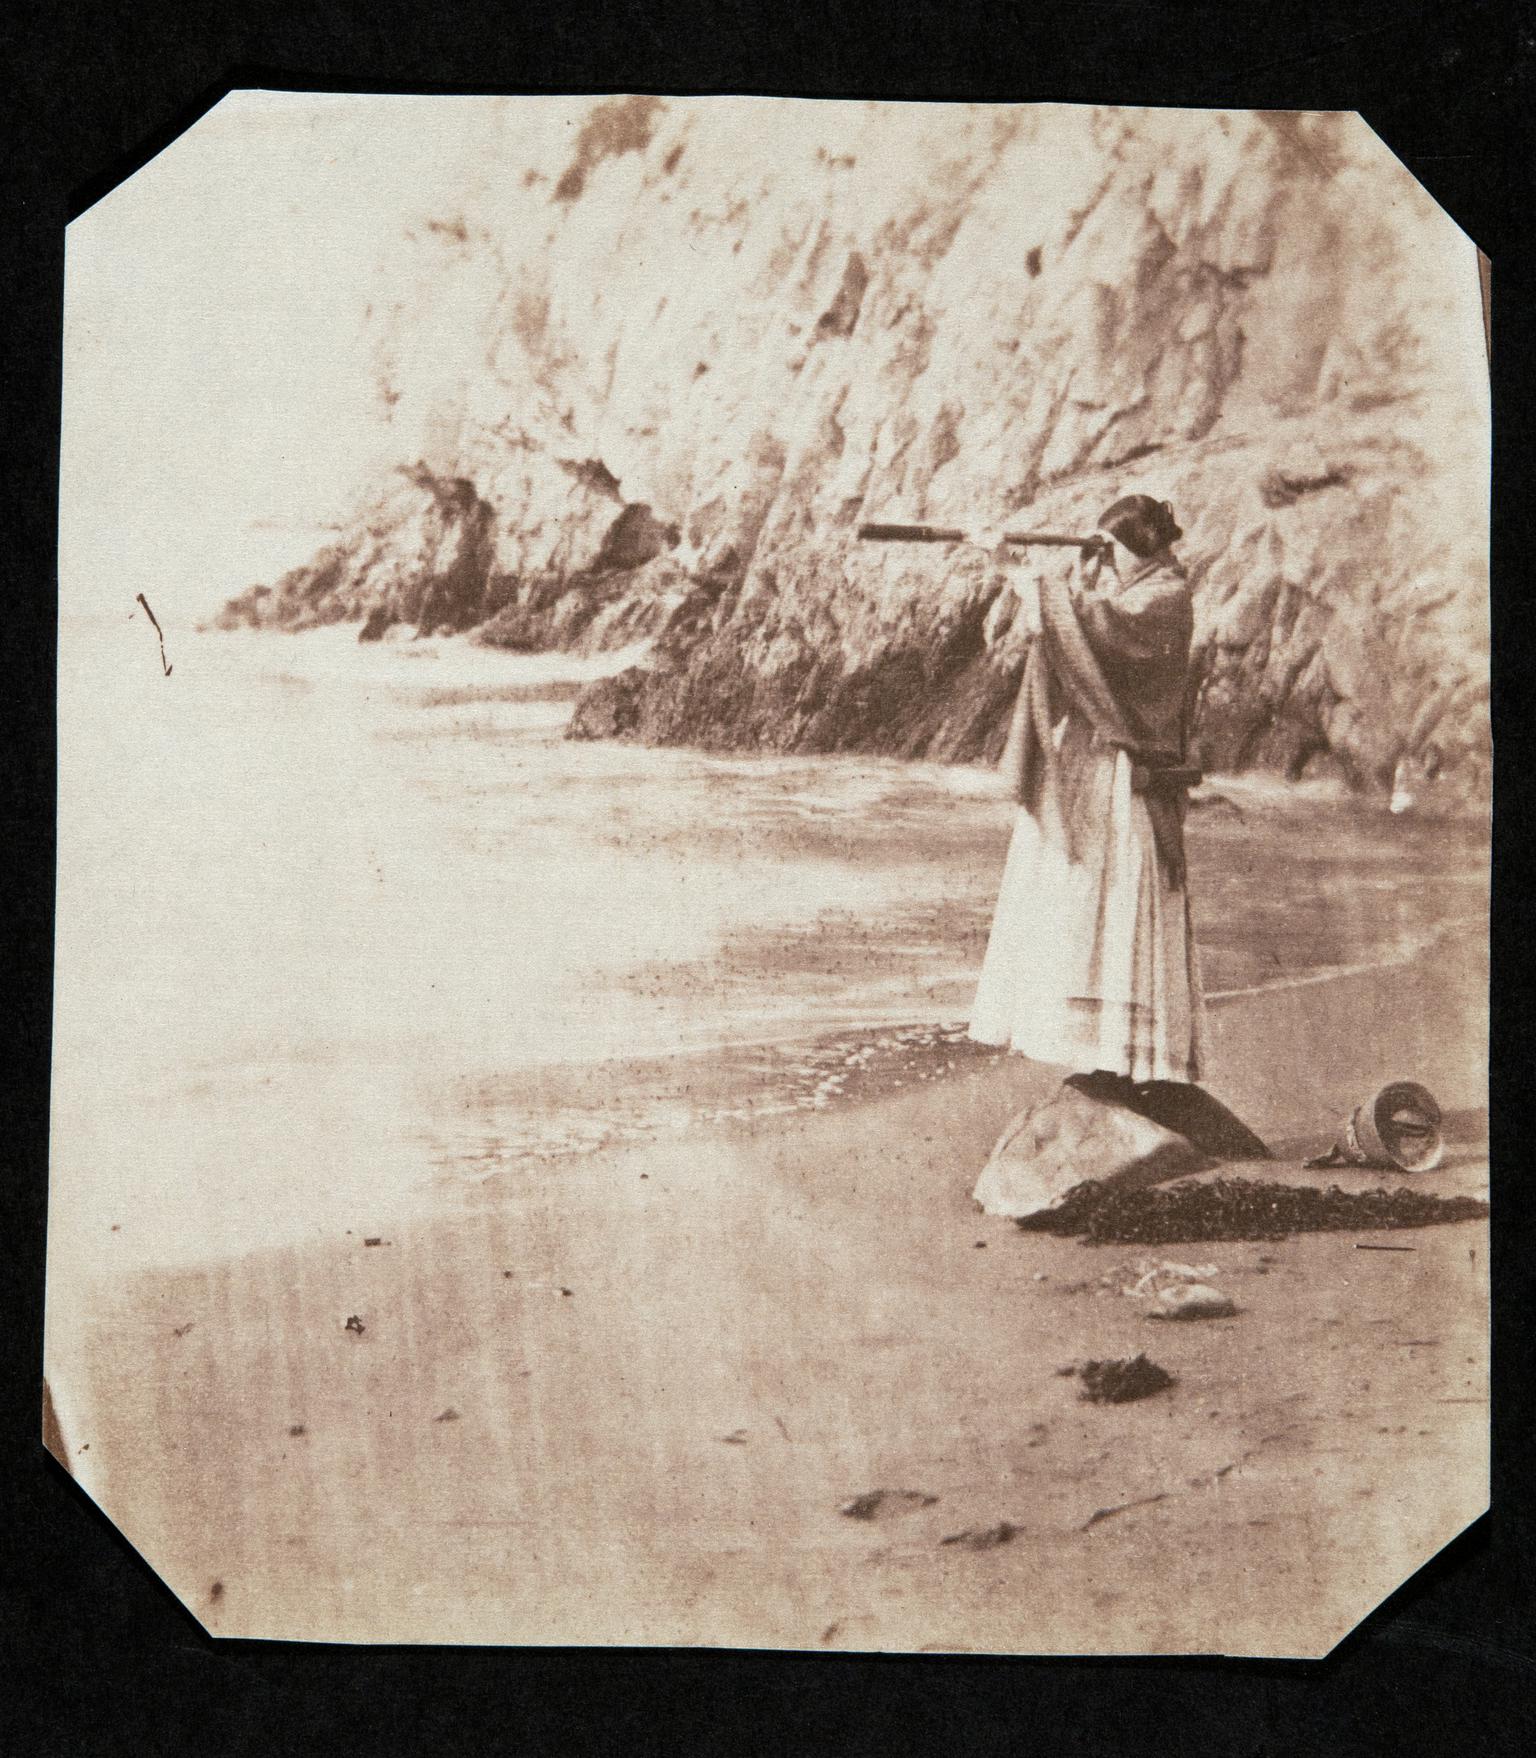 Thereza at Caswell Bay with telescope, photograph